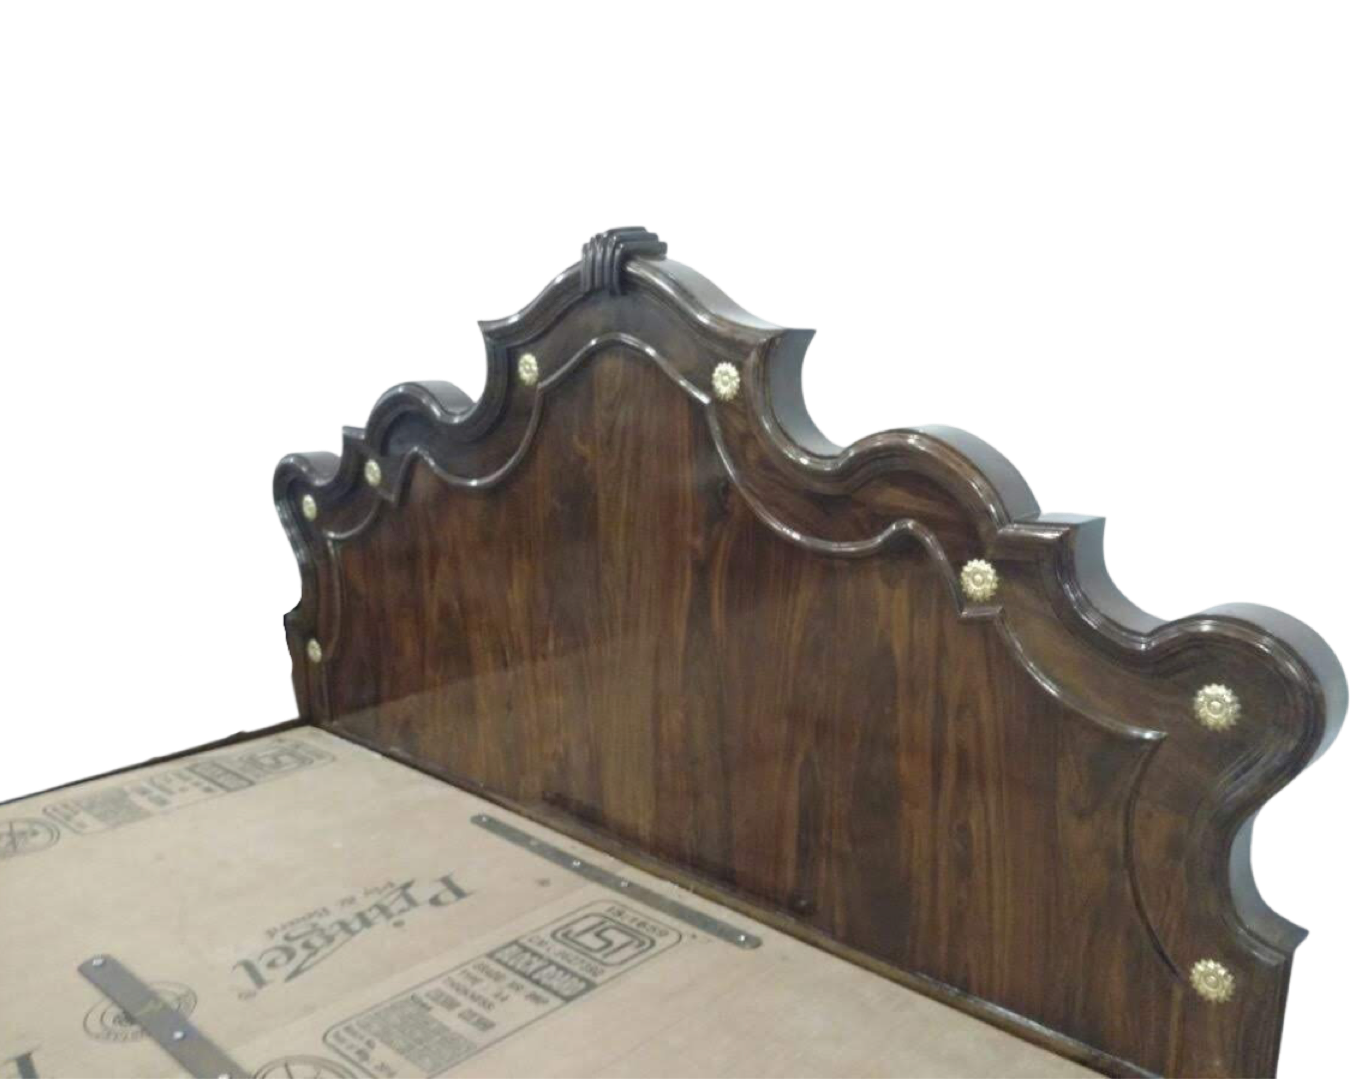 shop our beautifully handcrafted Carving wooden bed in Bangalore, featuring intricate carvings & Beass design that exude elegance and sophistication . This king size carved bed made with Sheesham wood